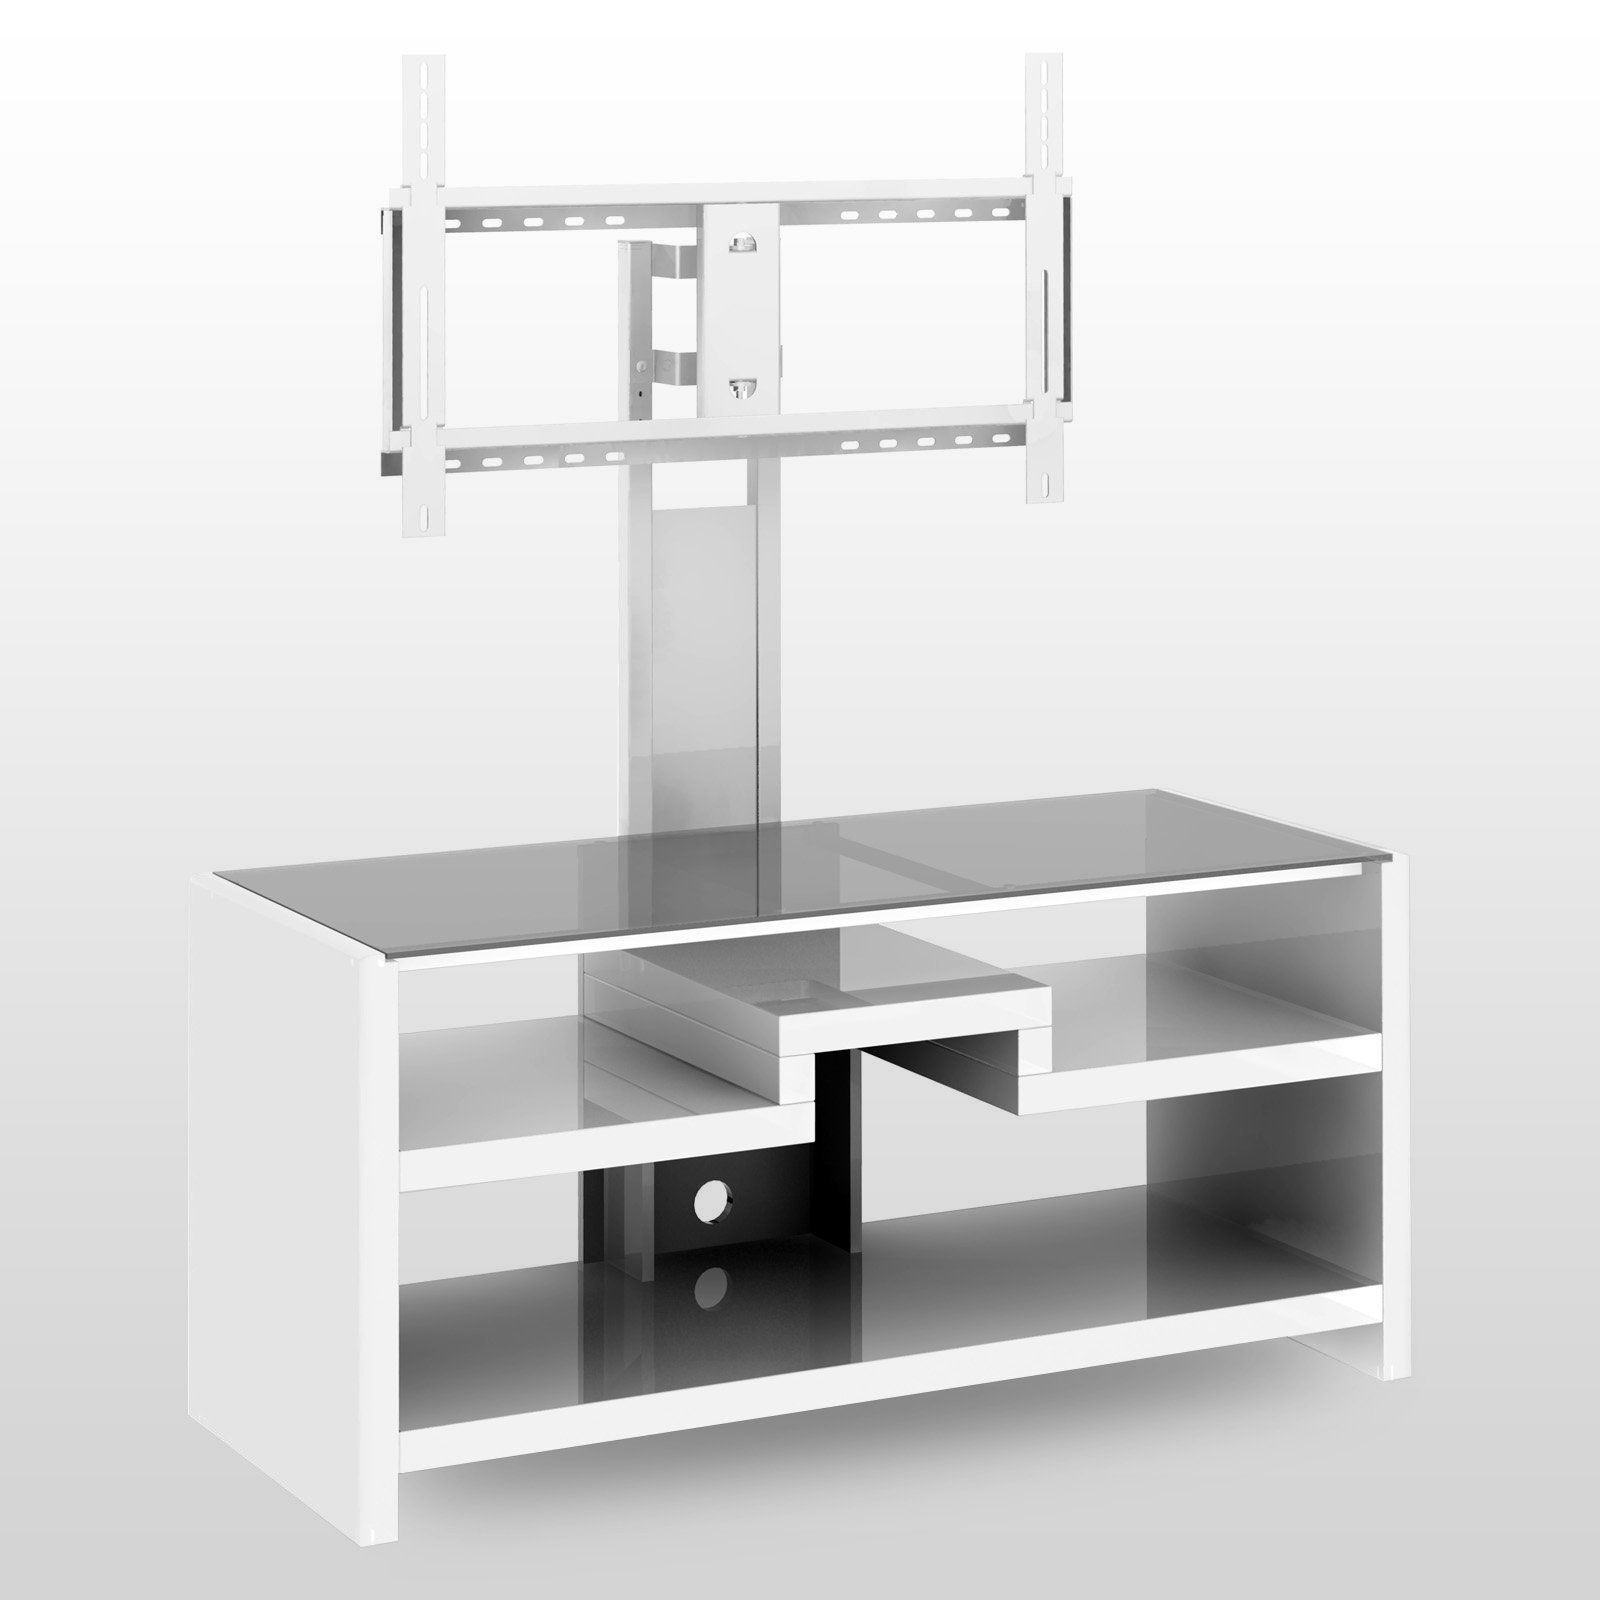 Cool Flat Screen Tv Stands With Mount – Homesfeed Intended For Wall Mounted Tv Cabinets For Flat Screens (View 8 of 15)